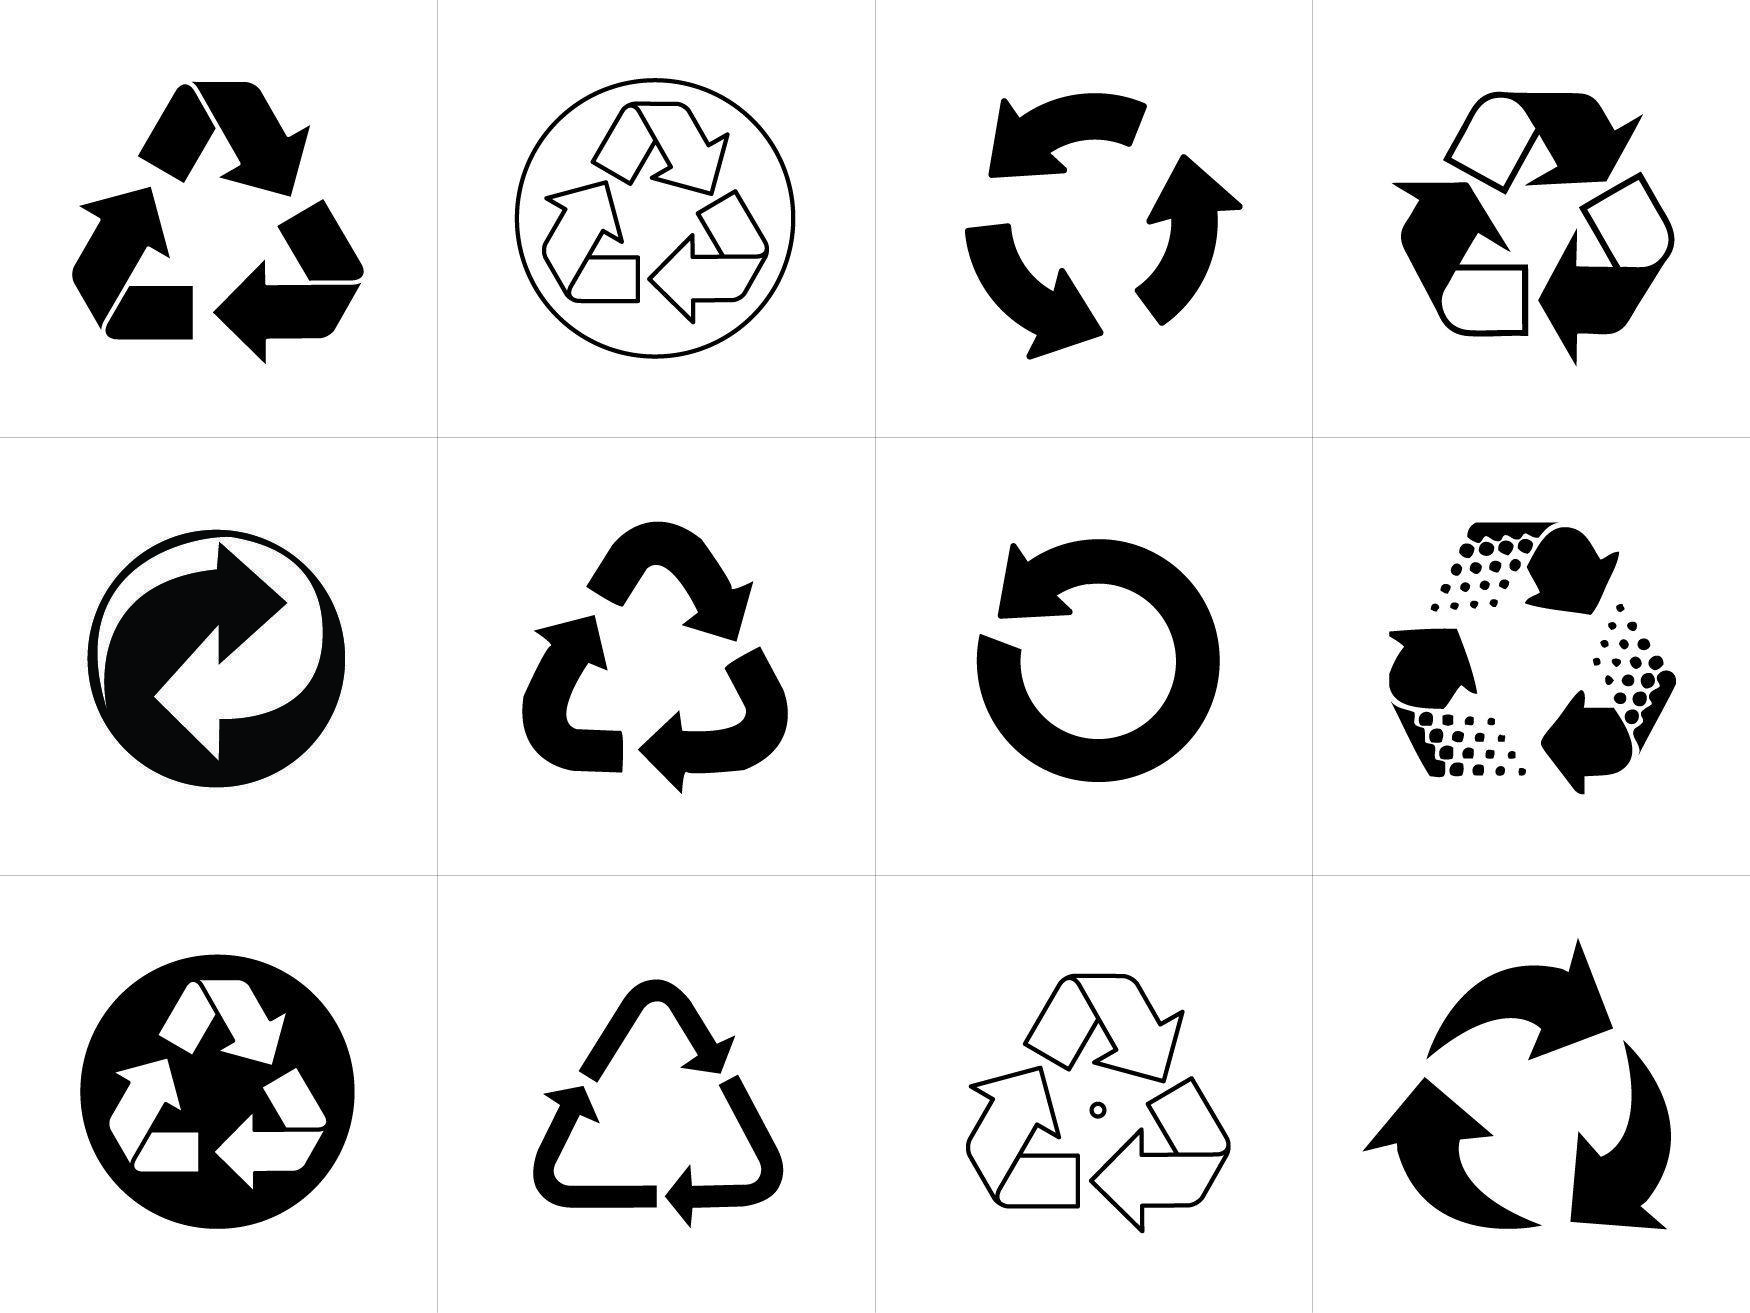 Black and White Recycle Logo - Recycling Symbol Vectors for Download | NEFF | Pinterest | Recycle ...